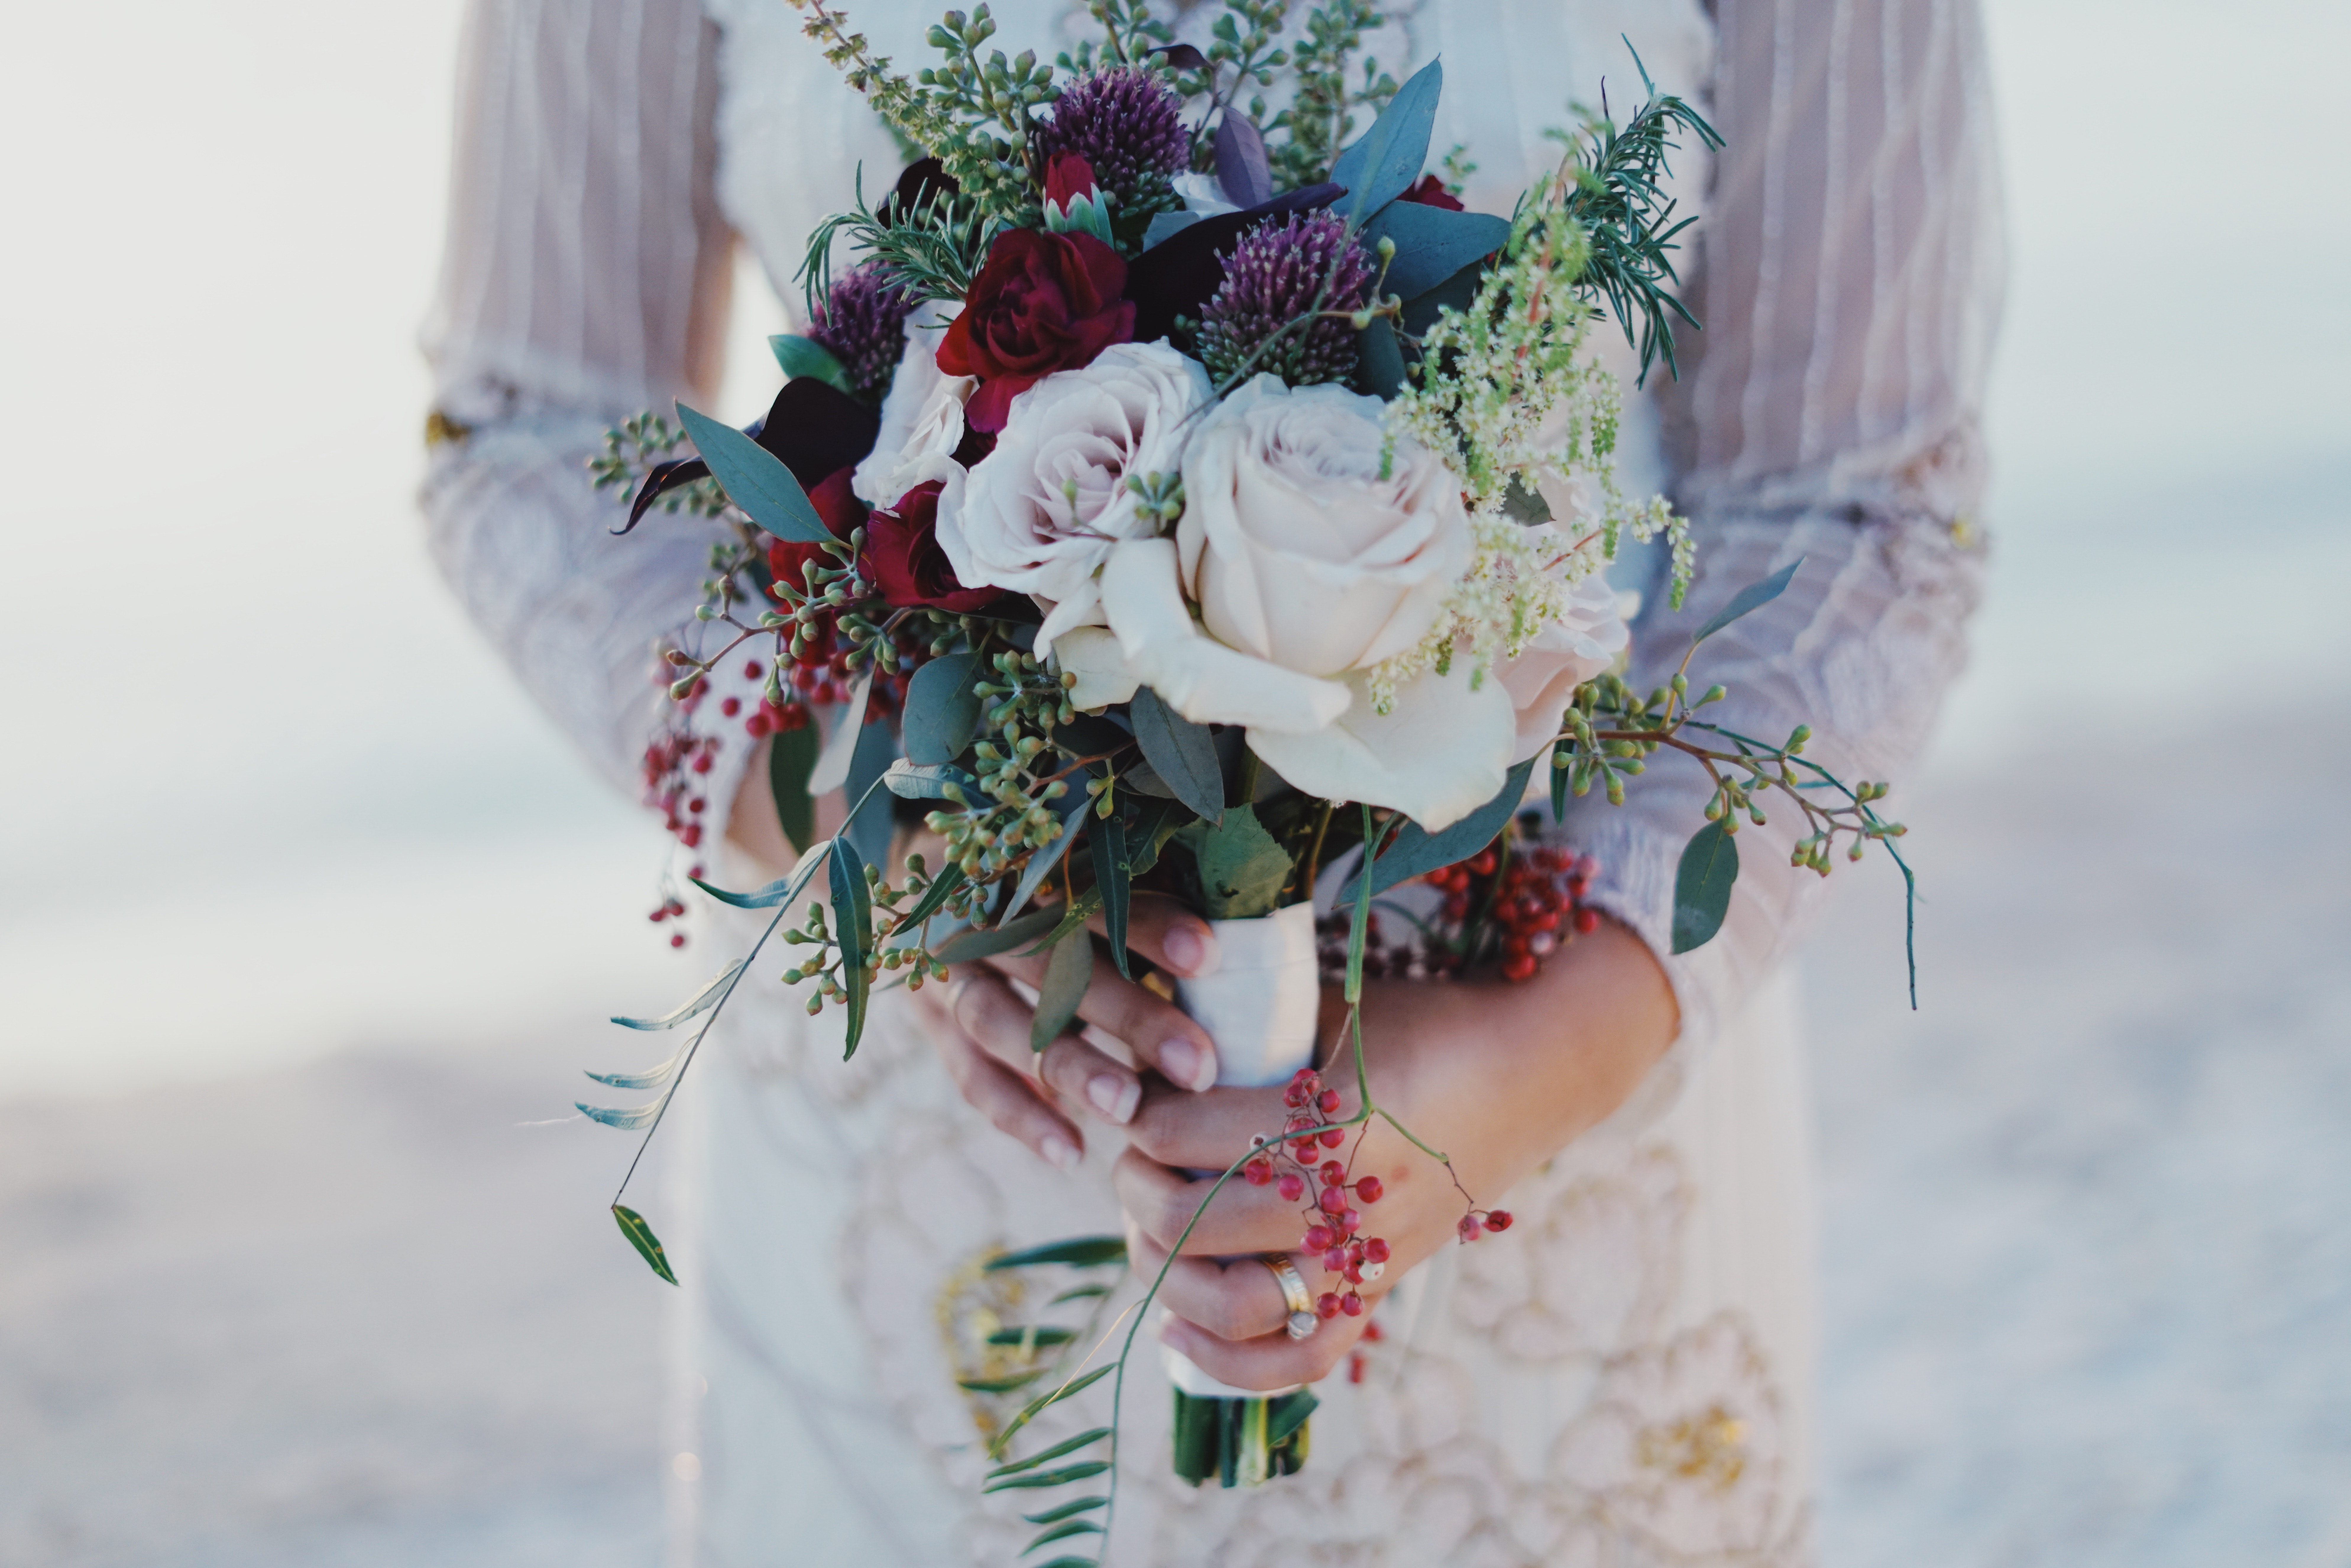 Woman holding red and white rose bouquet photo